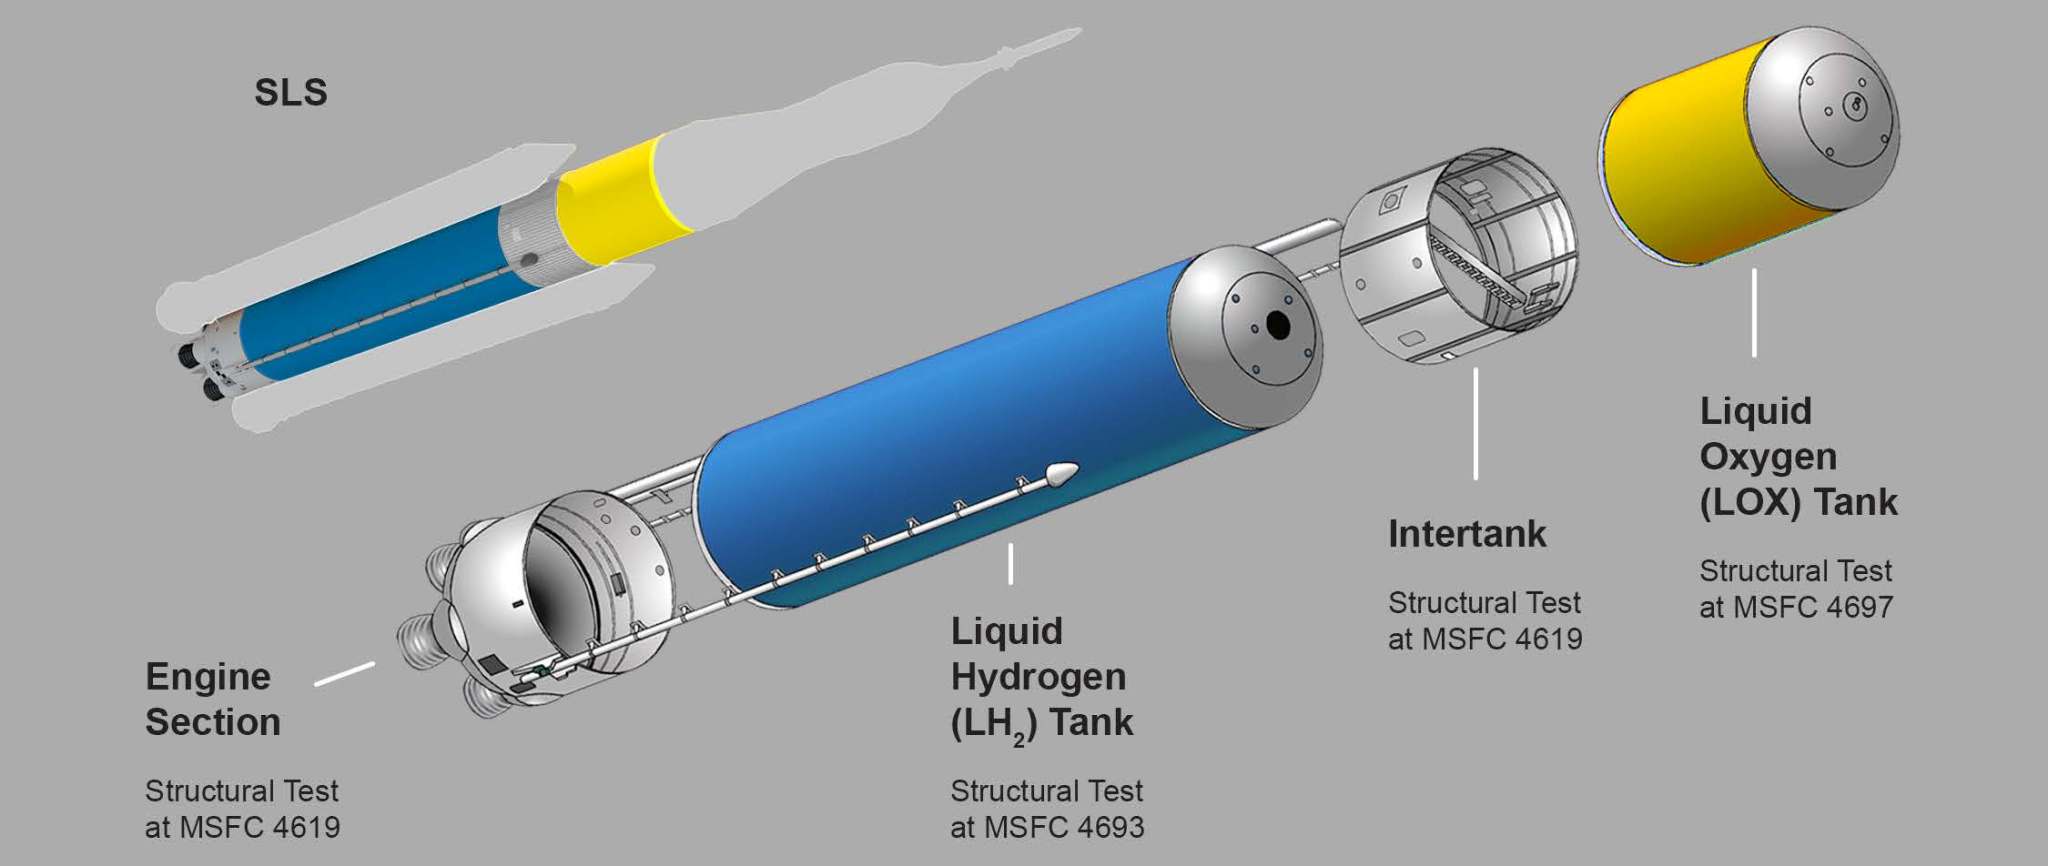 expanded view of the core stage for NASA’s Space Launch System